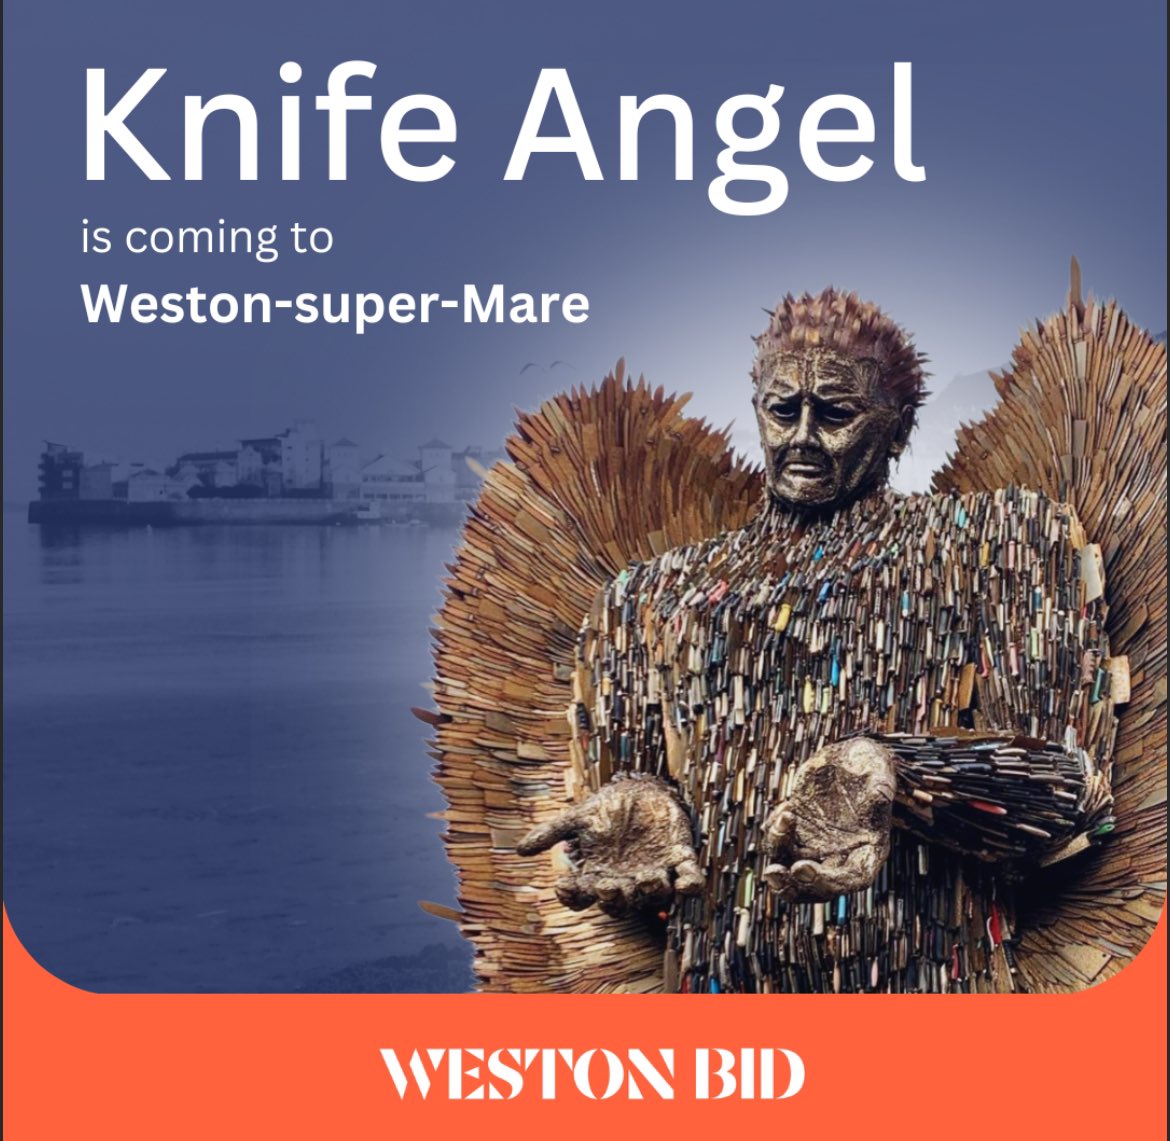 The poignant Knife Angel comes to Weston this May. Crafted from 100,000 surrendered knives, this 27-feet-tall poignant sculpture honours victims of knife crime & reminds us of violence's impact. Find out more about Knife Angel’s visit: saferstrongerns.co.uk/our-services/v… #KnifeAngel